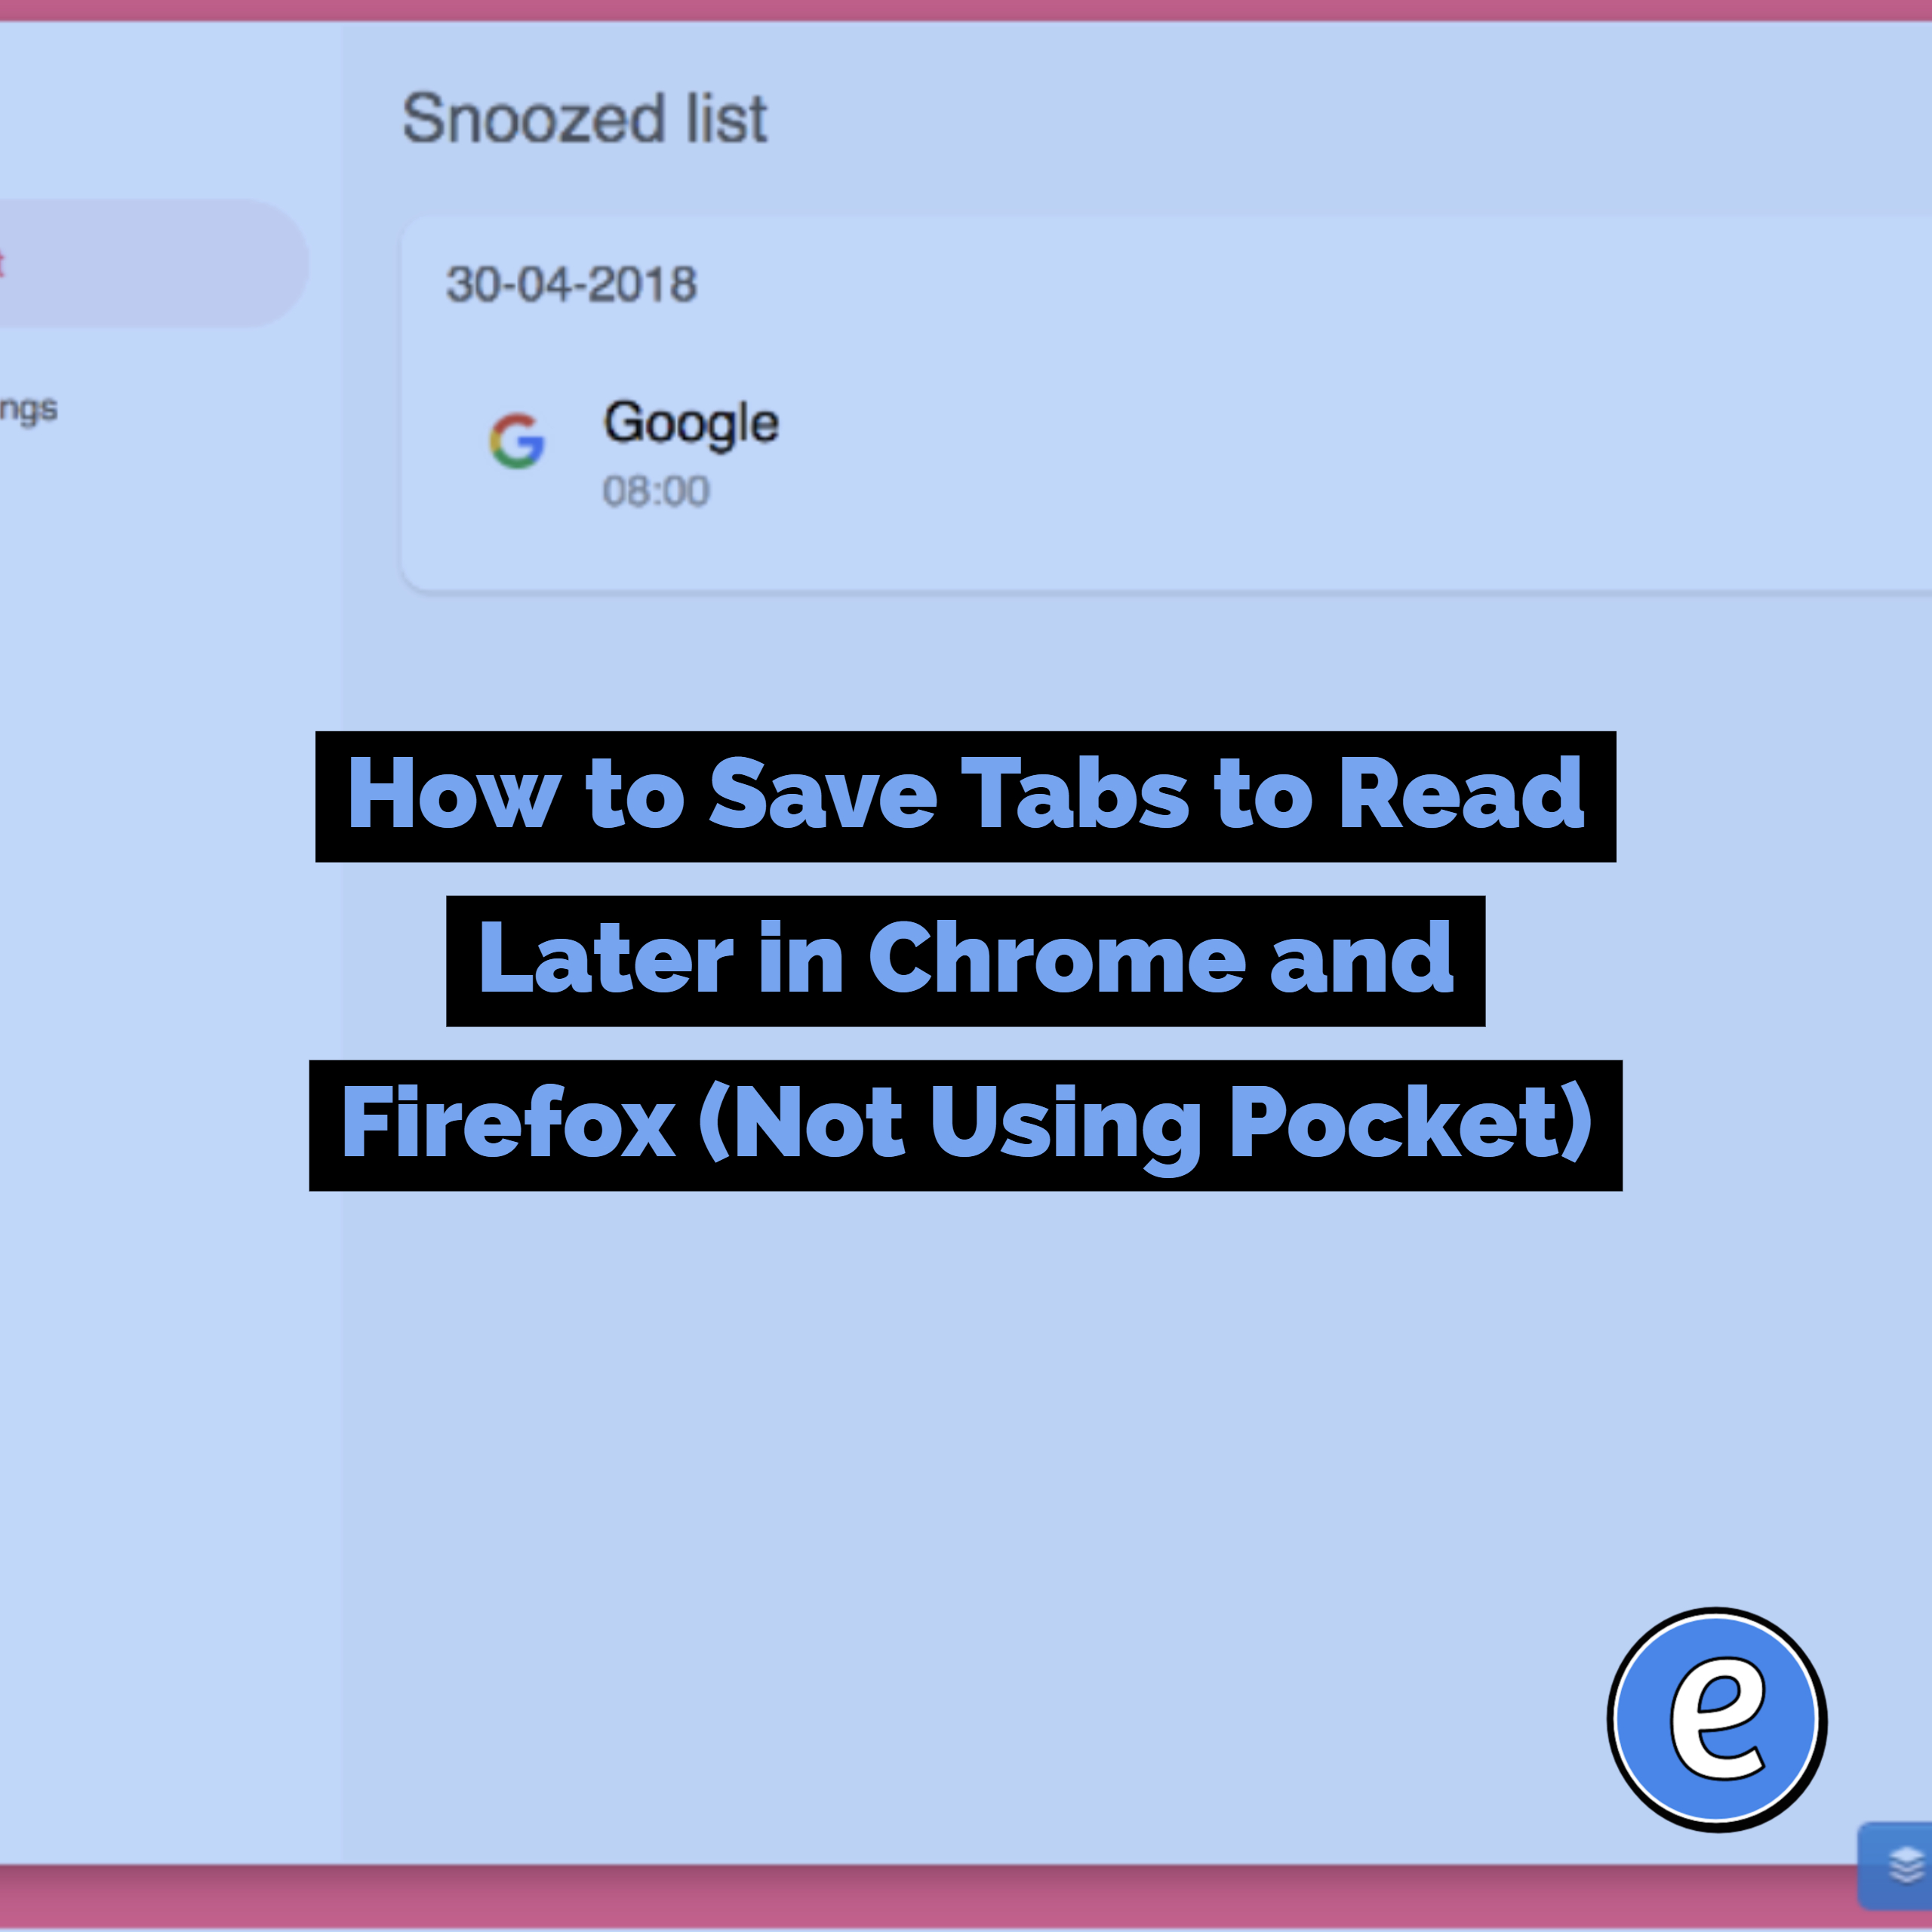 How to Save Tabs to Read Later in Chrome and Firefox (Not Using Pocket)